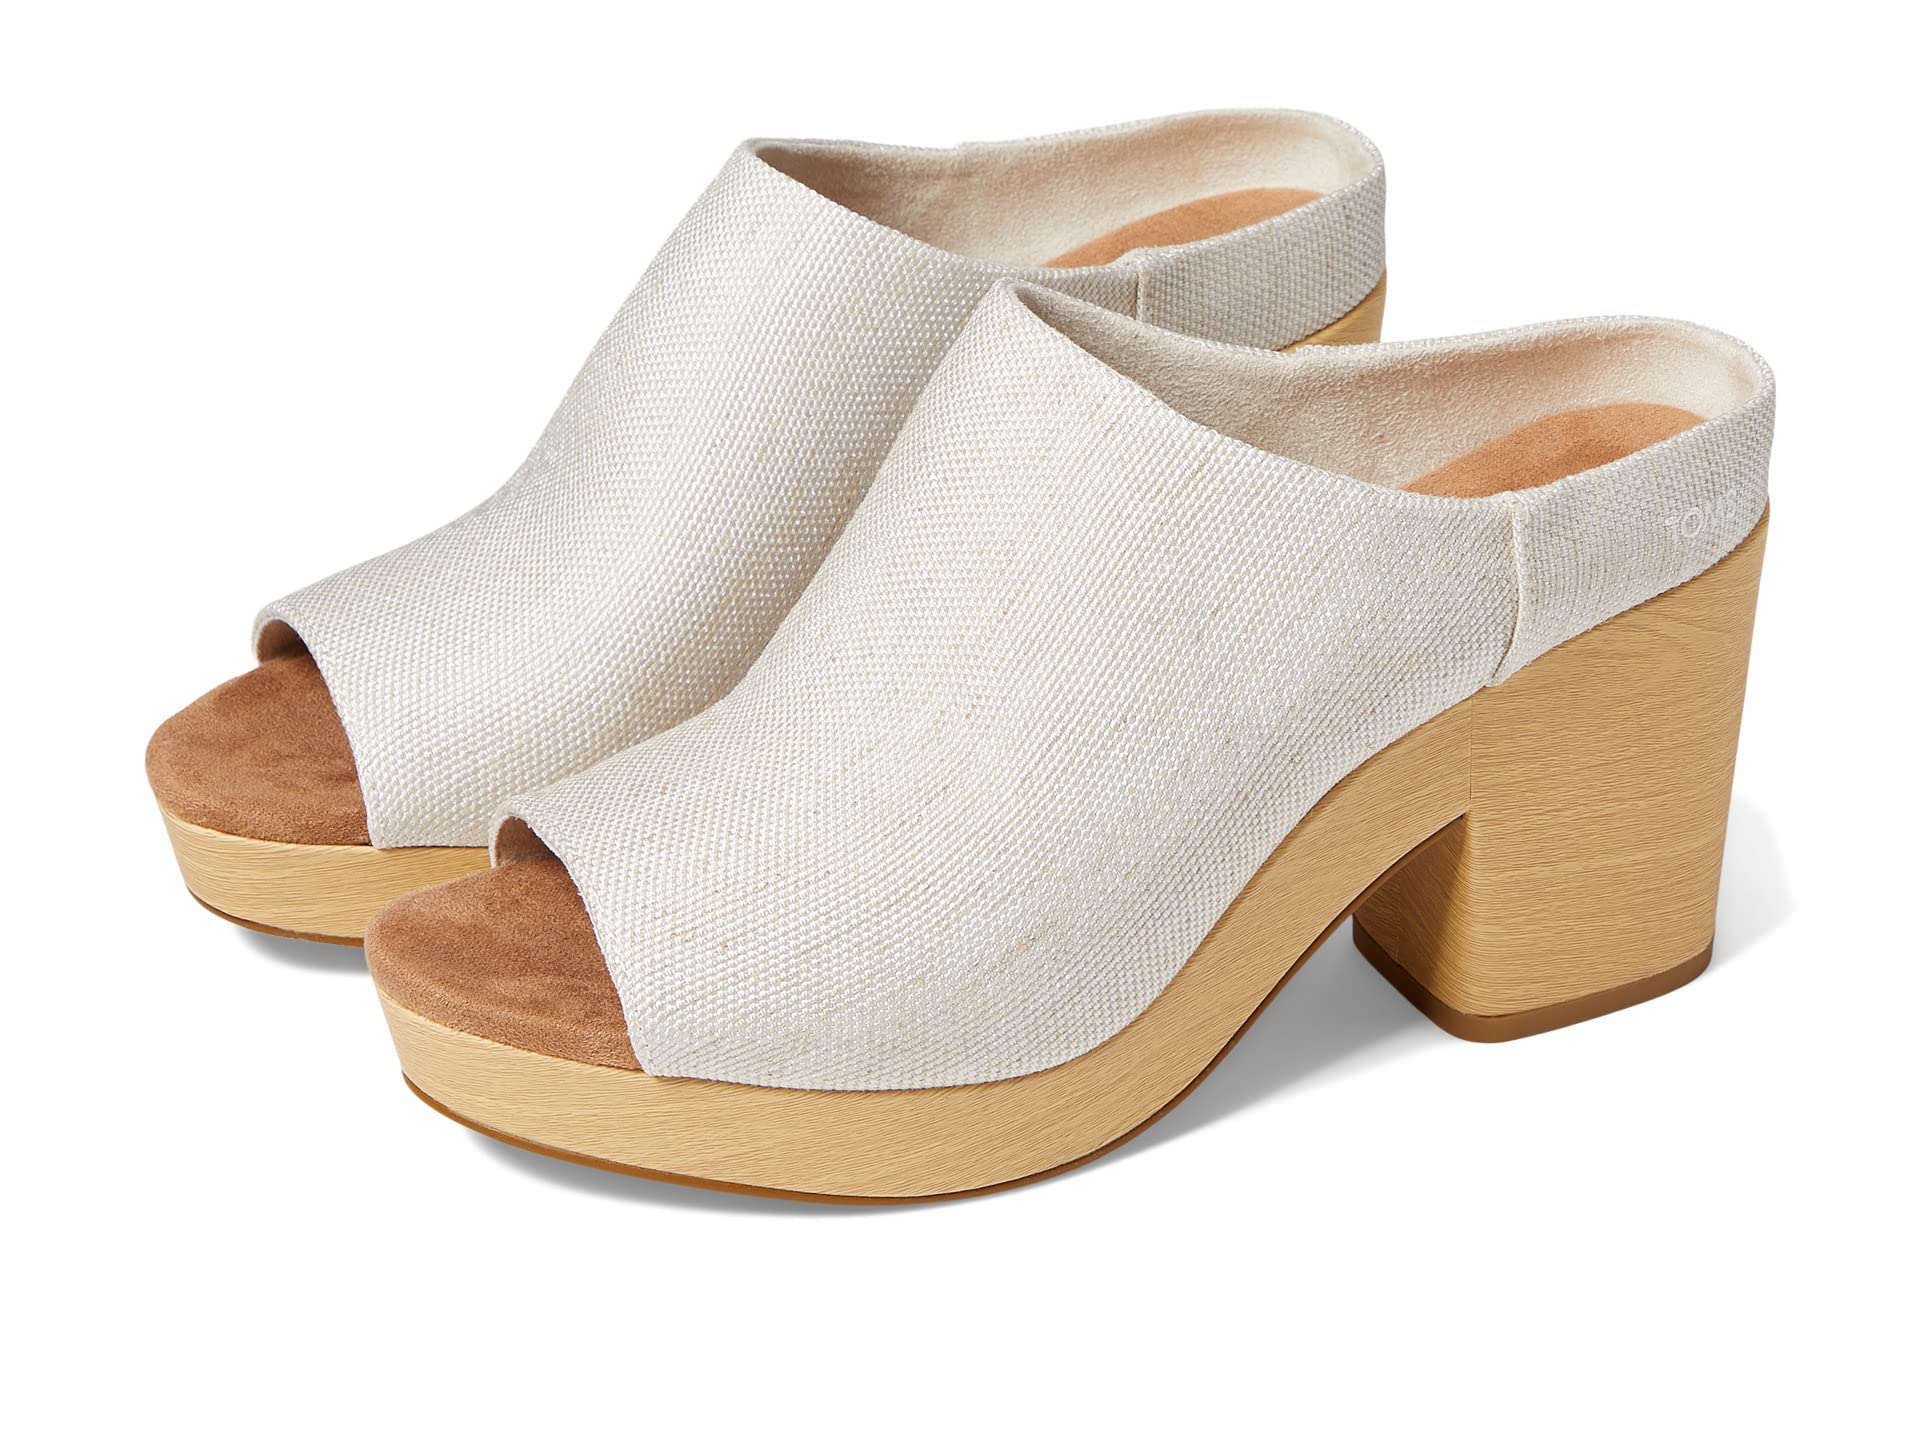 TOMS Women's Florence Block Heels (Natural) $27 + Free Shipping w/ Prime or on $35+